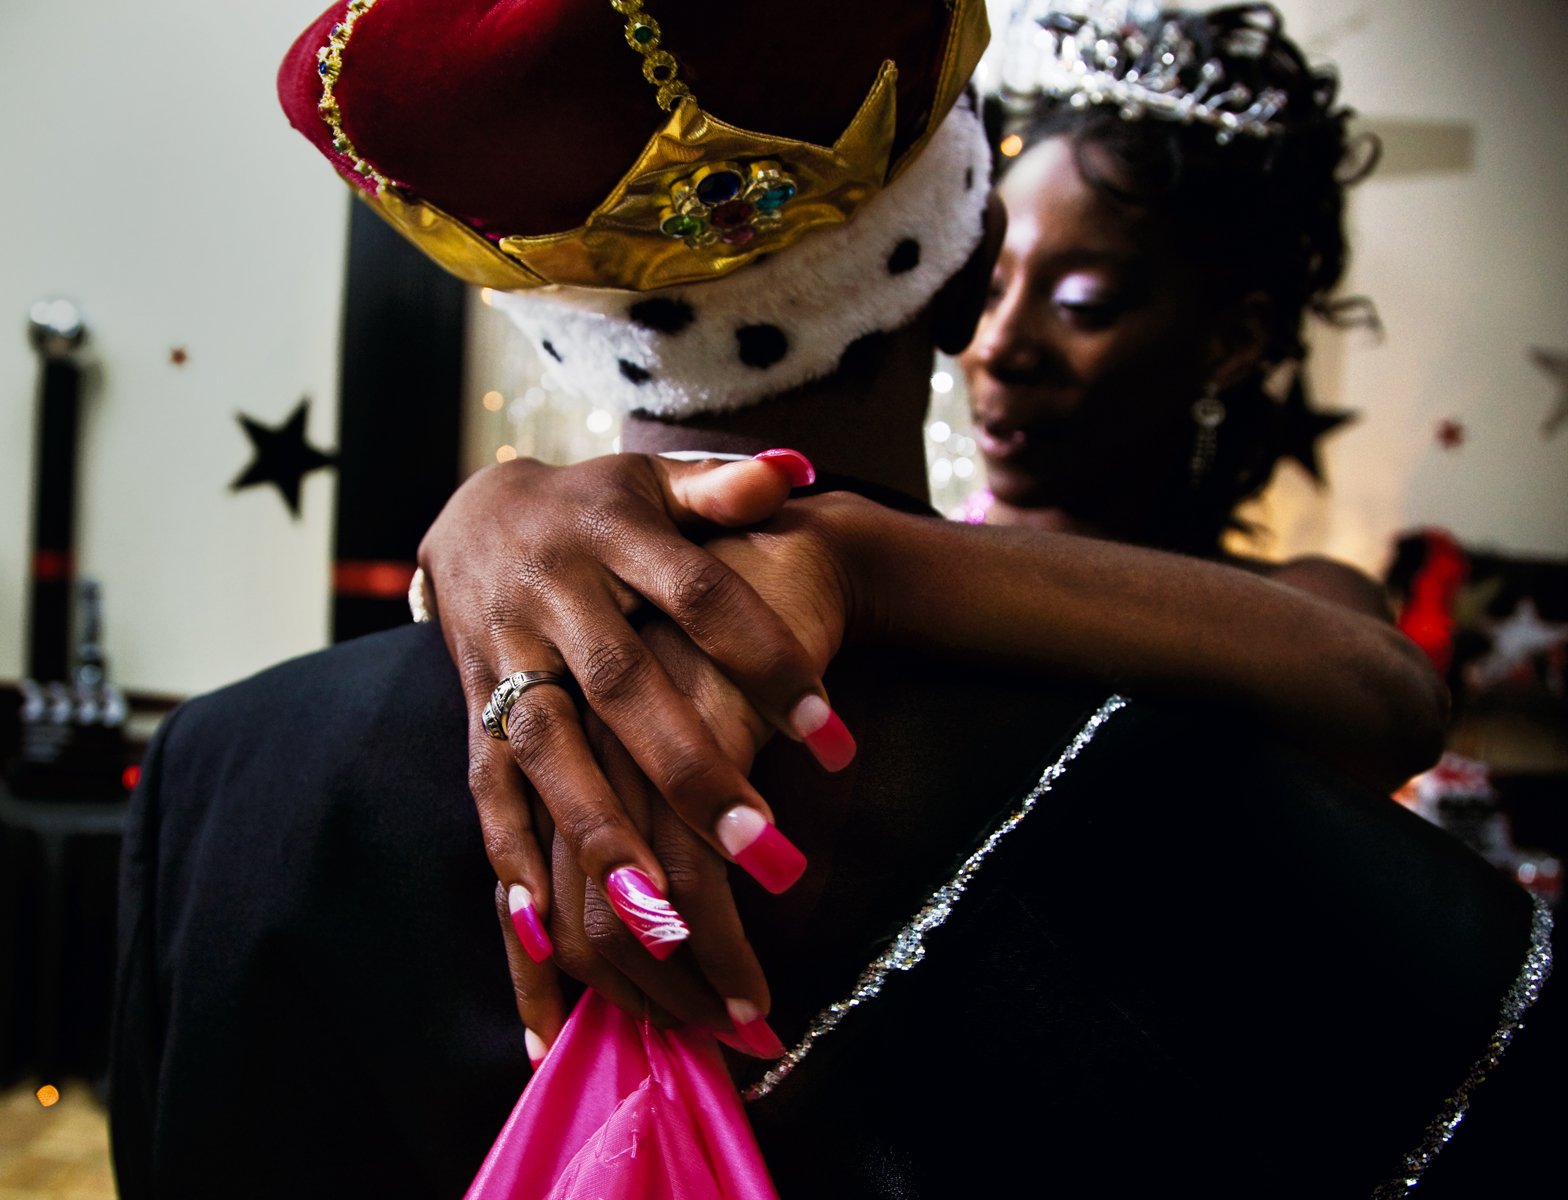 Prom king and queen, dancing at the black prom, Vidalia, Georgia, 2009